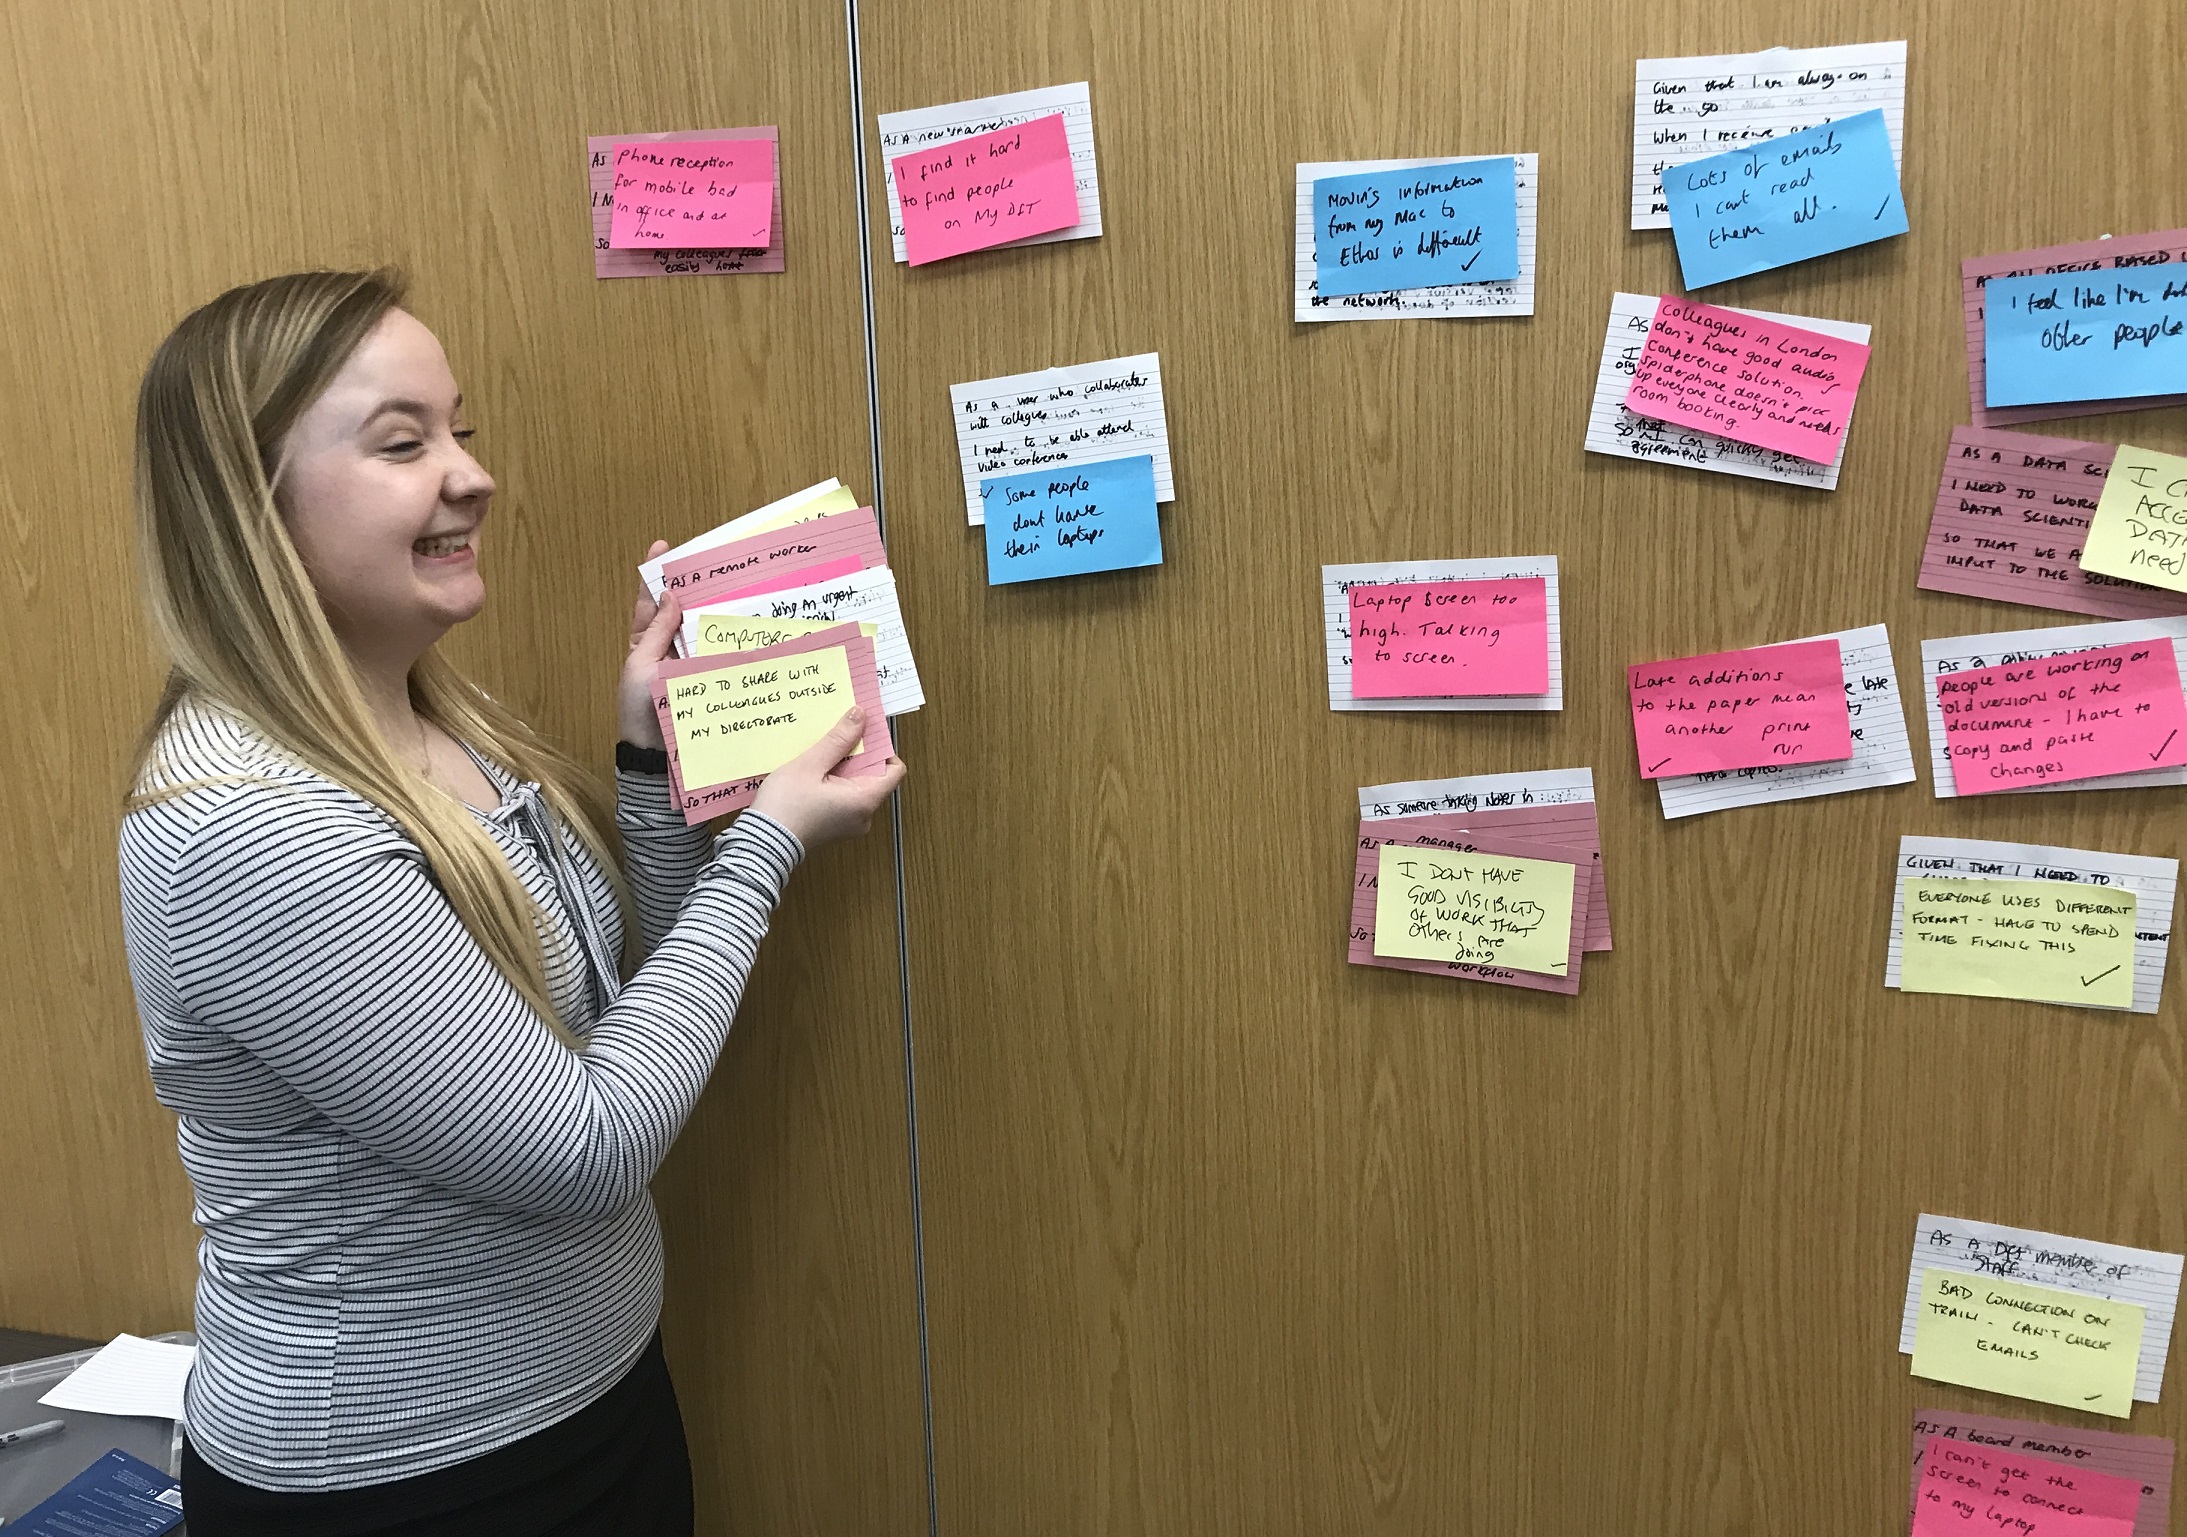 Gemma doing a card sort on a wooden wall using sticky notes